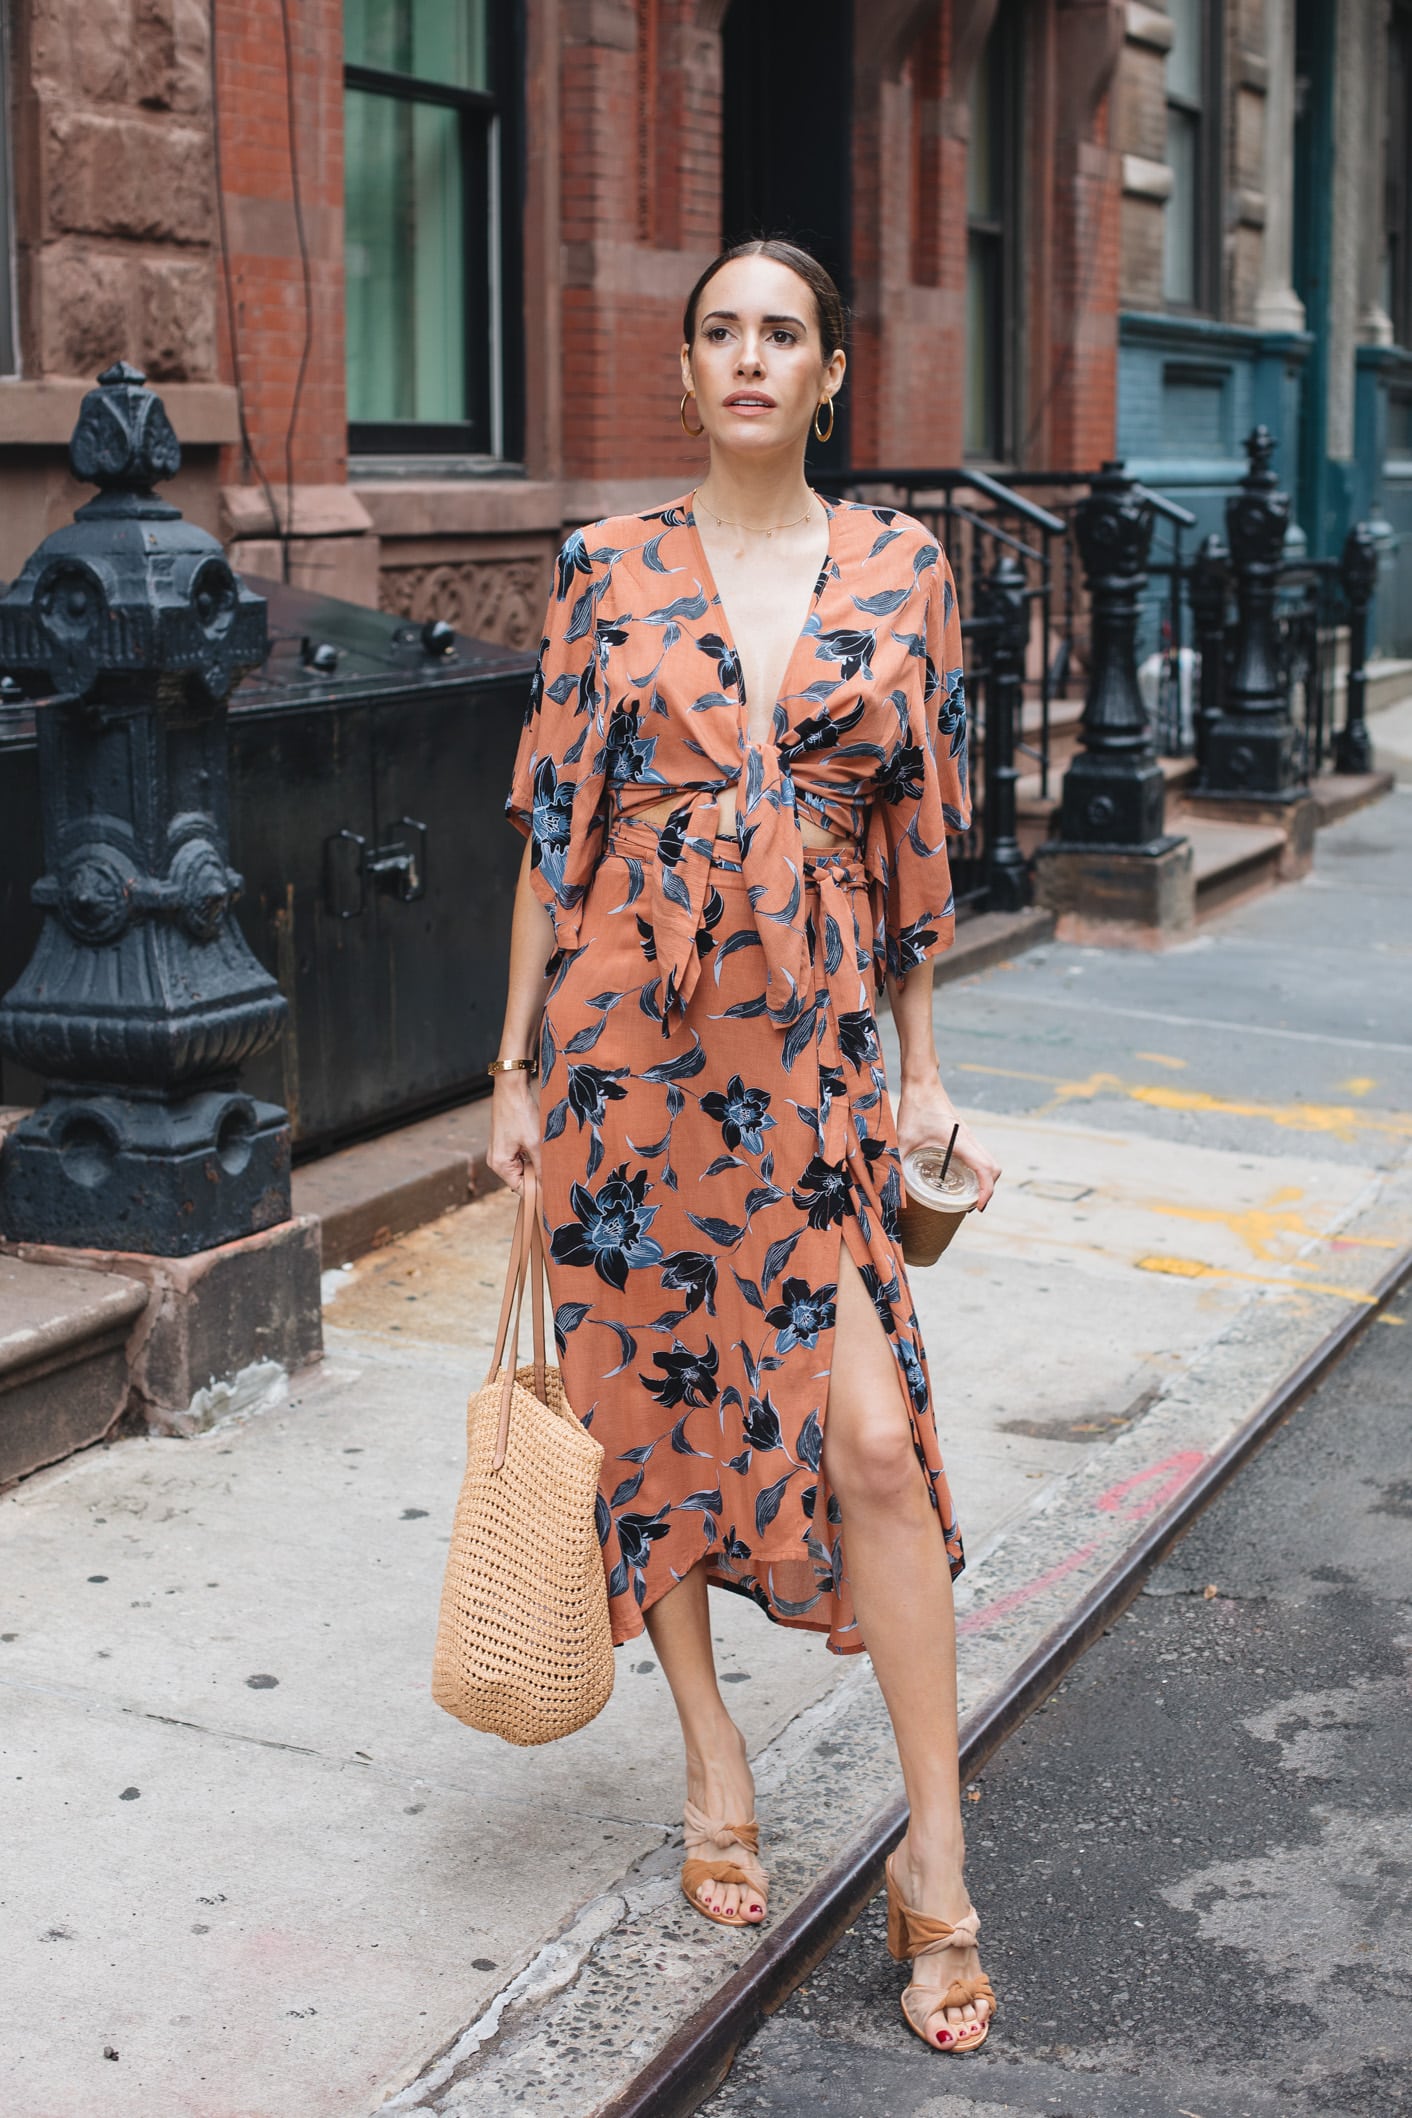 Louise wearing Faithfull the brand fall florals dress in New York